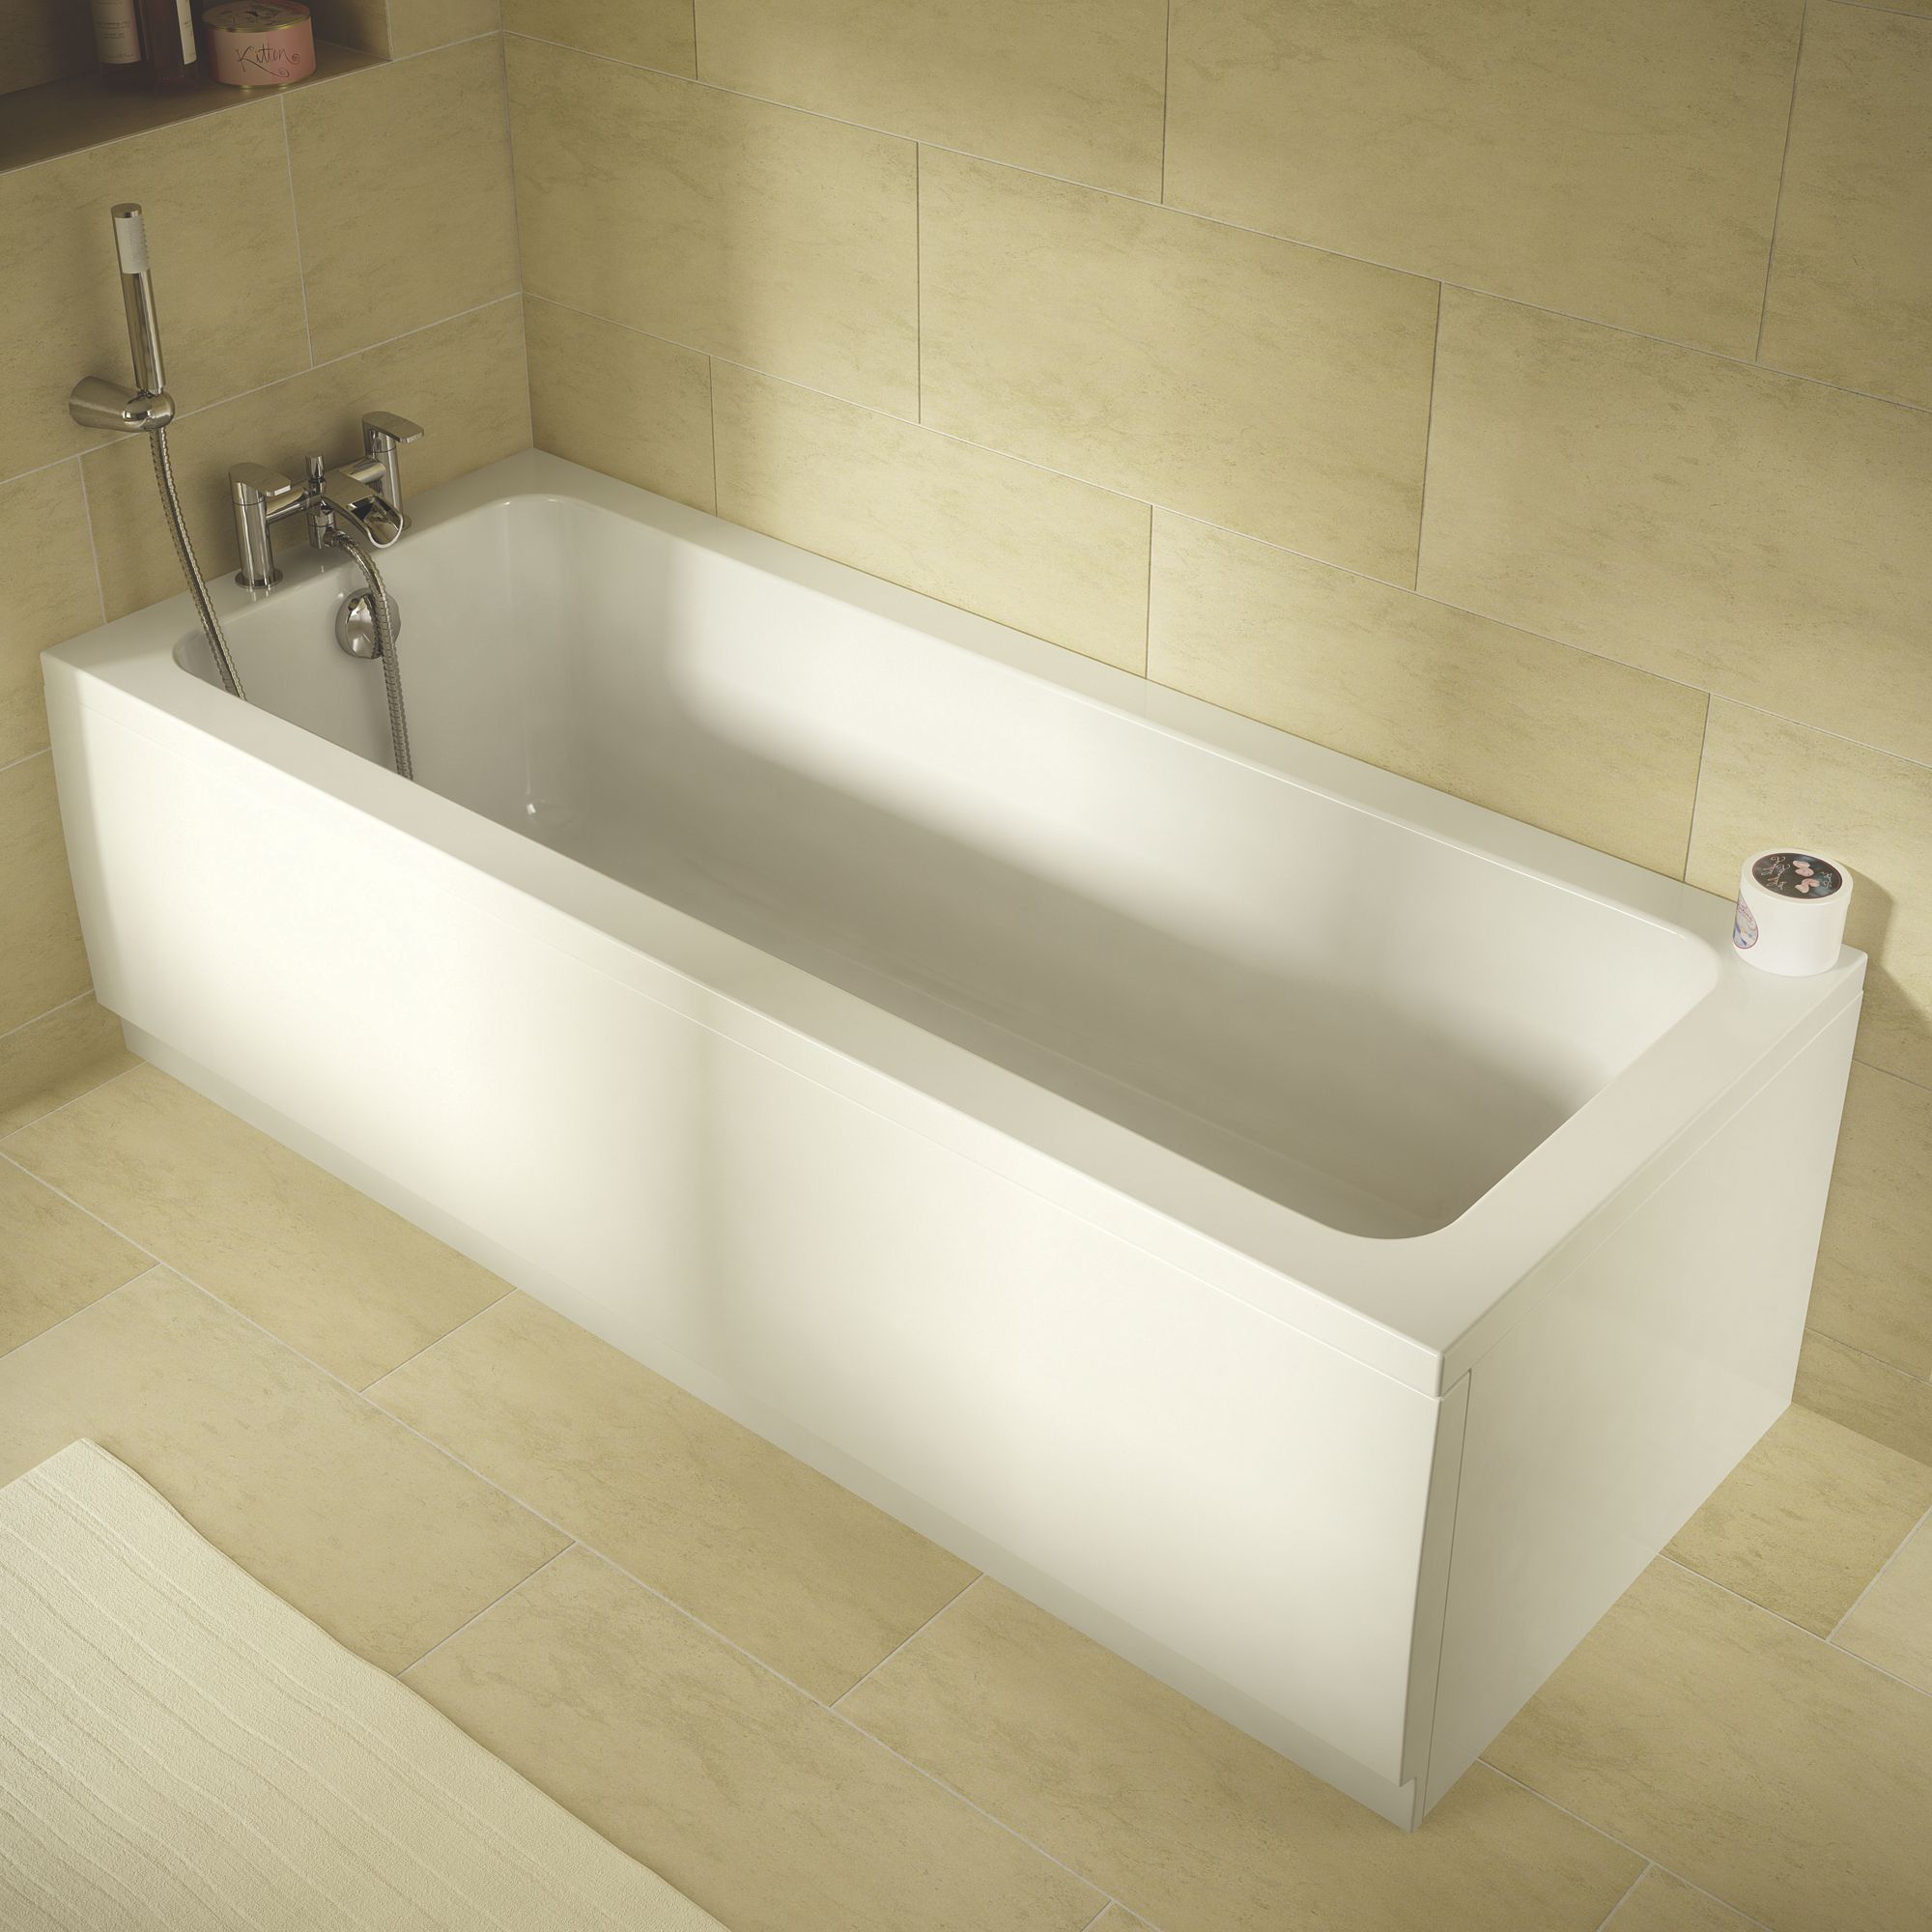 Image of Wickes Camisa Reinforced Straight Bath - 1700 x 700mm